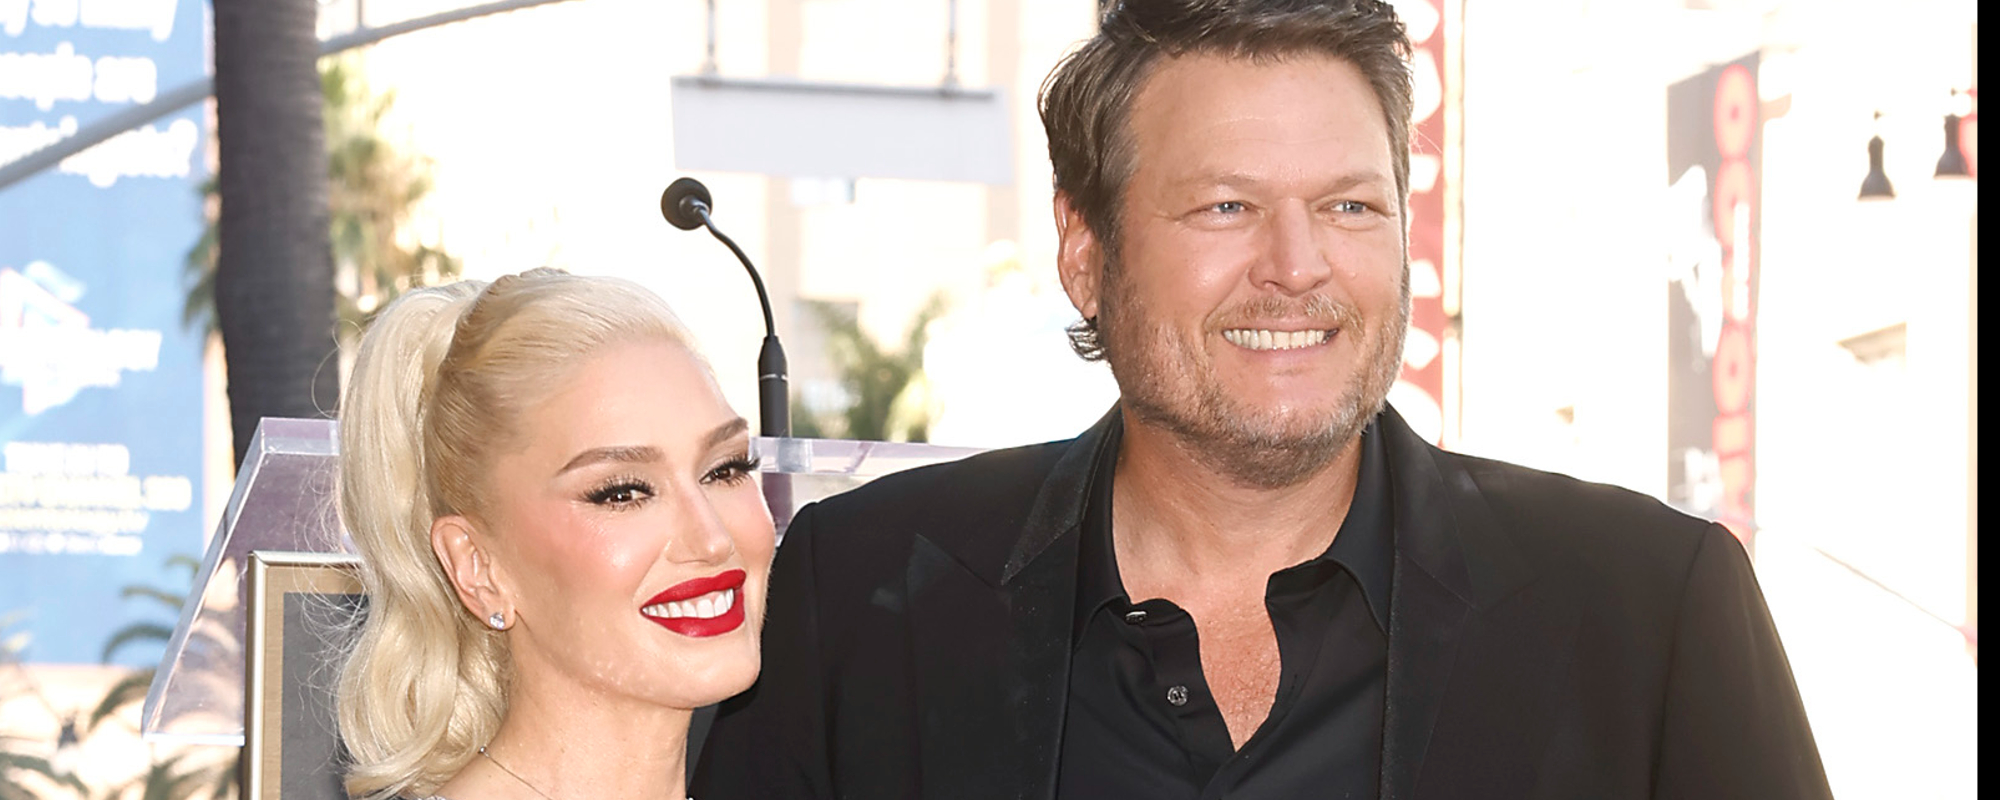 Gwen Stefani Accompanied by Blake Shelton as She’s Inducted Into Orange County Hall of Fame: “Wow, This is My Life?”